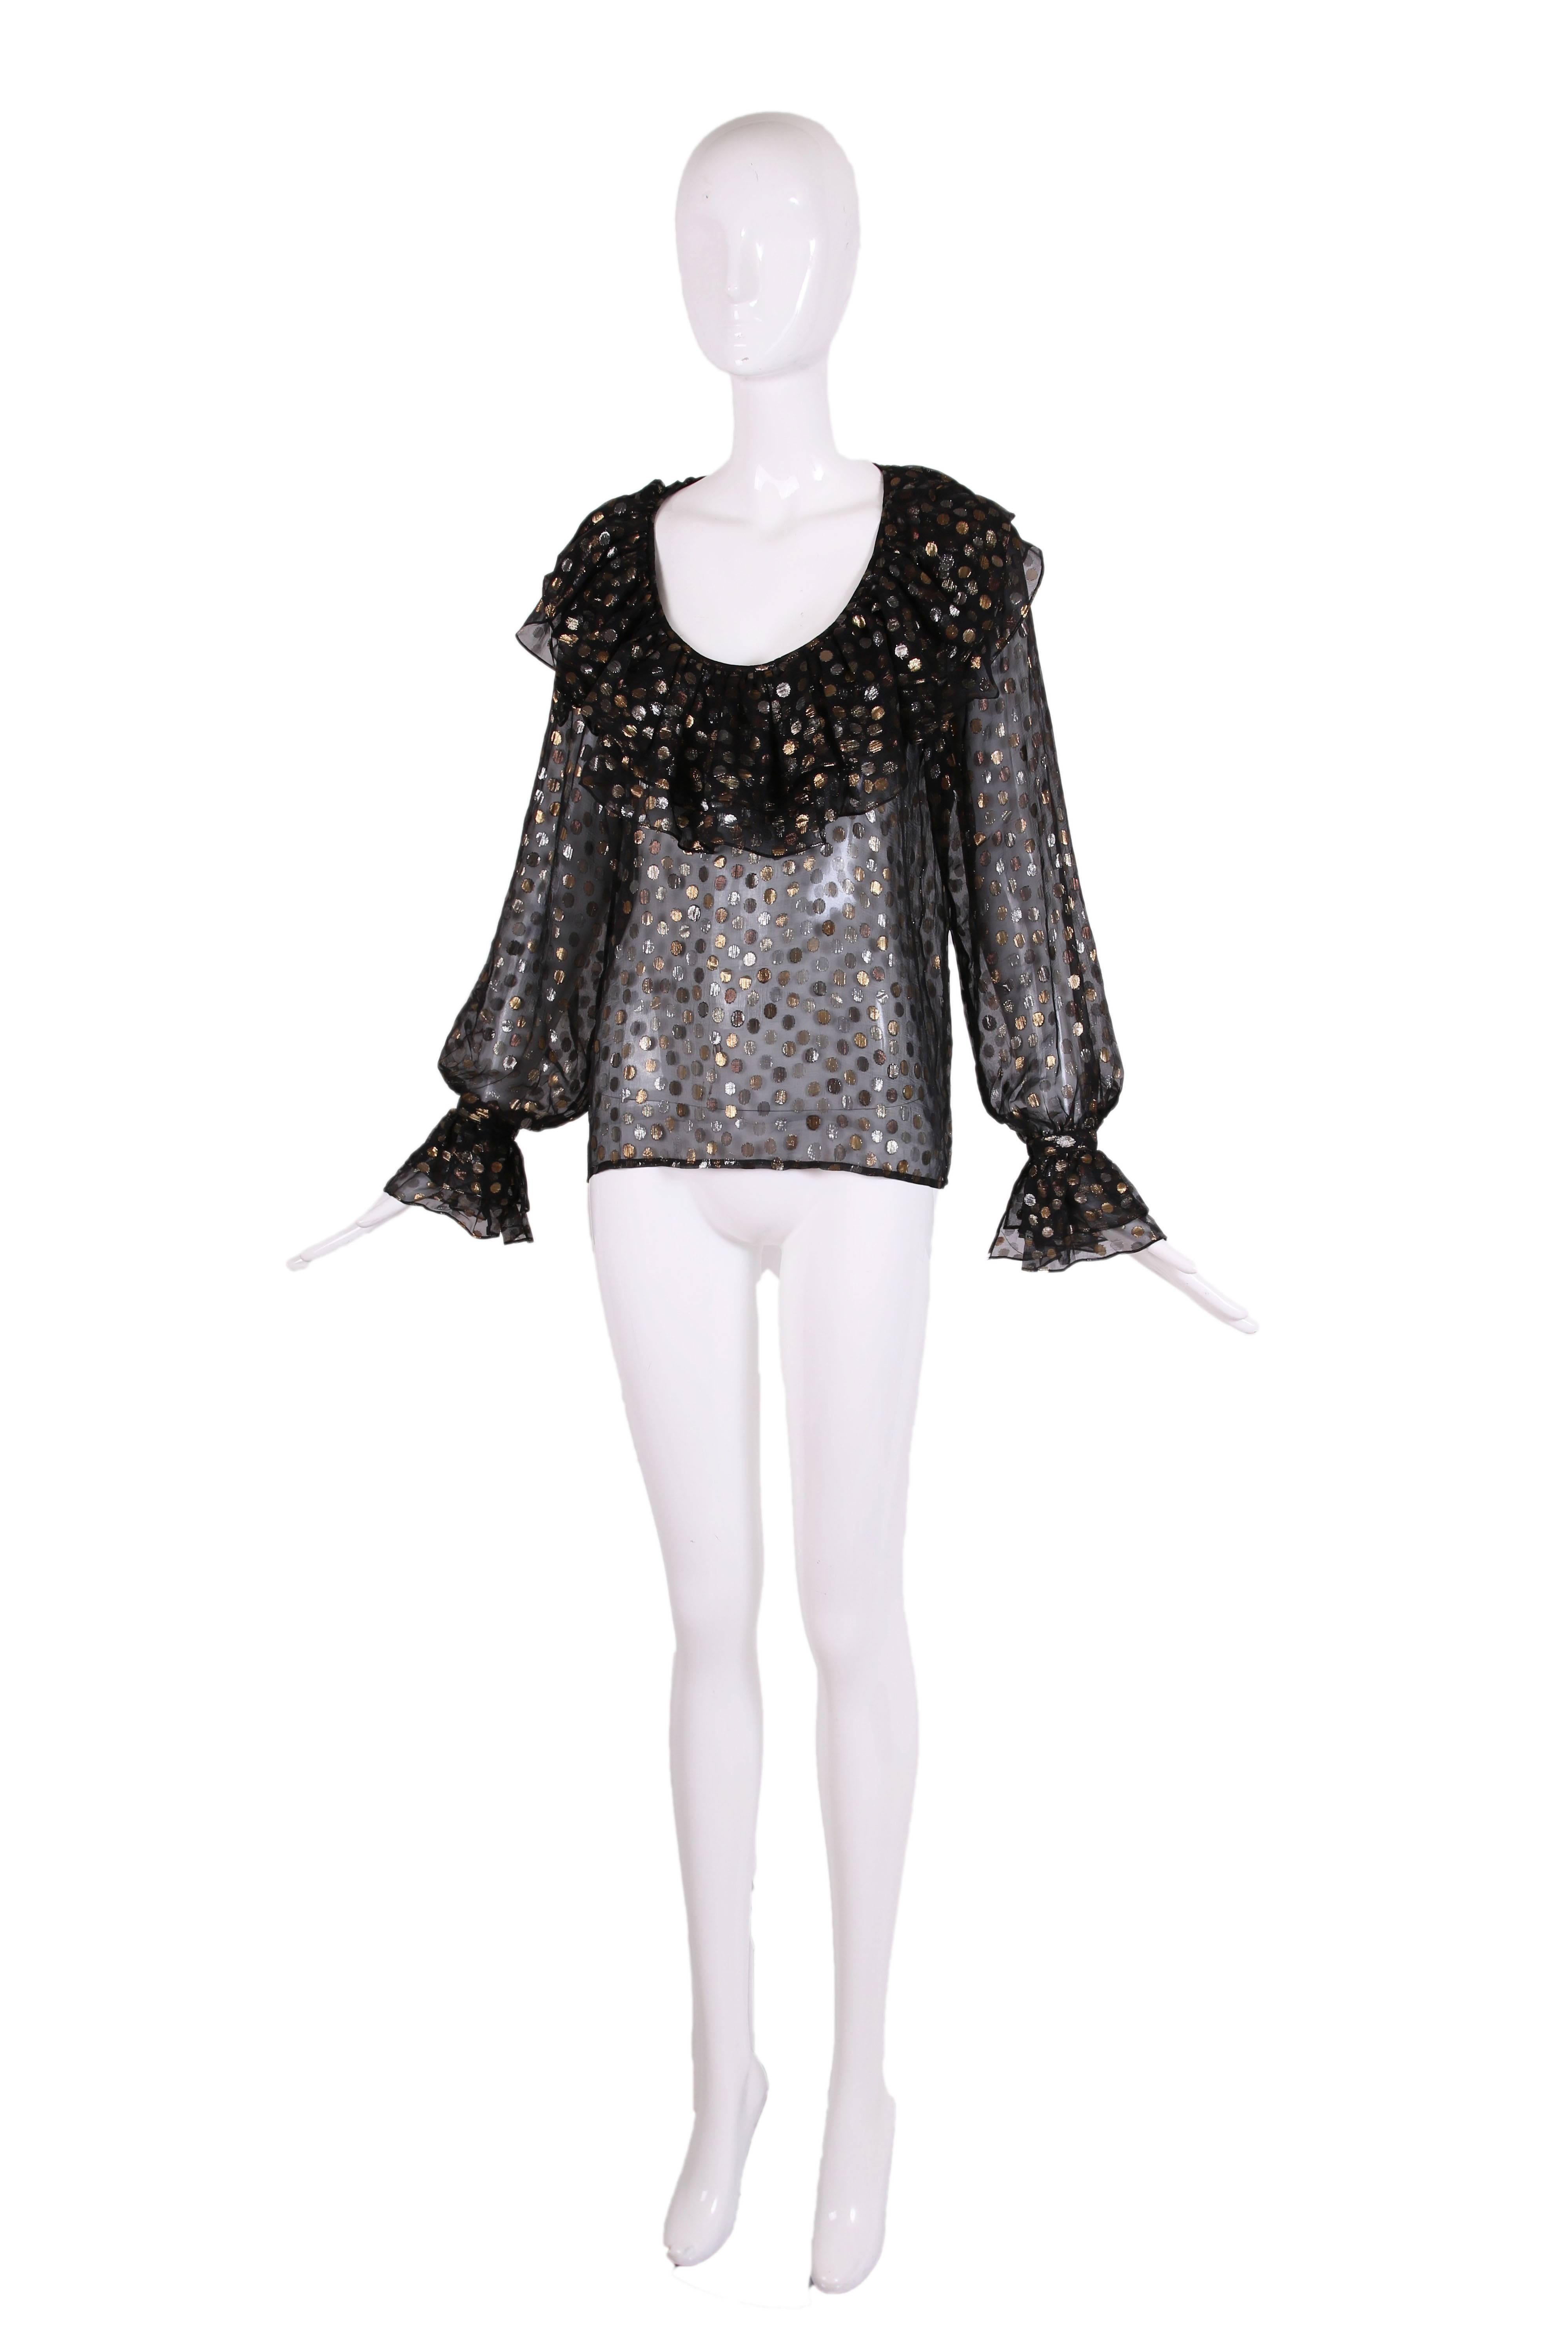 1970's Yves Saint Laurent black, silver & gold polka dot pattern transparent scoop neck blouse with ruffled neckline and cuffs. In excellent condition. Size tag 38.